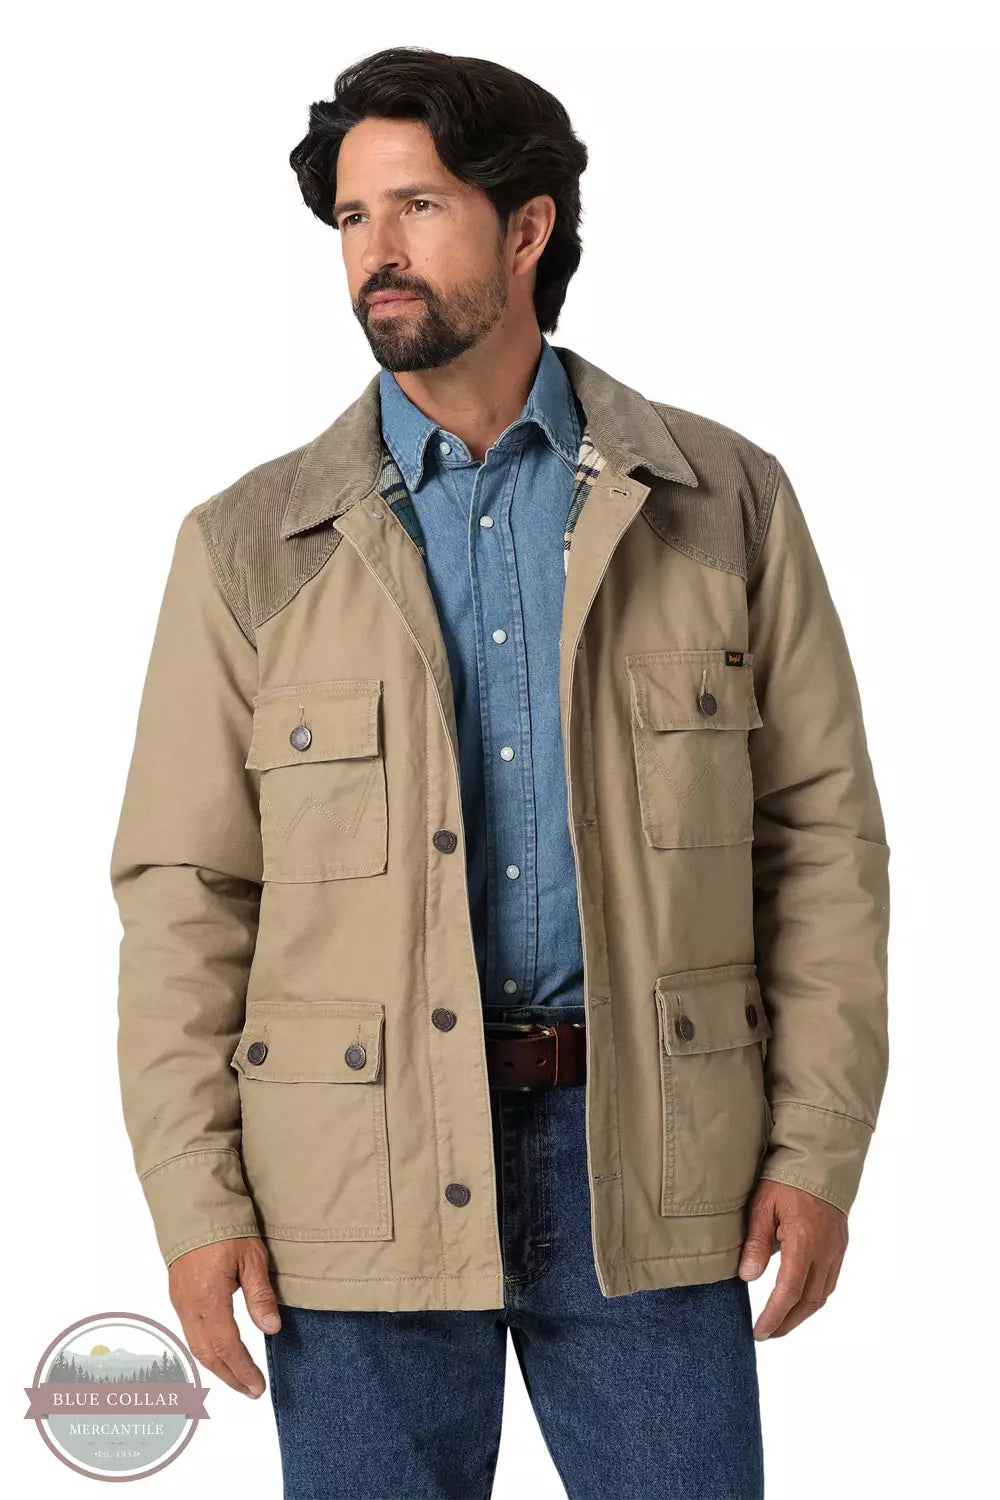 Wrangler 112335746 Corduroy Yoke Lined Barn Coat in Cathay Spice Front View